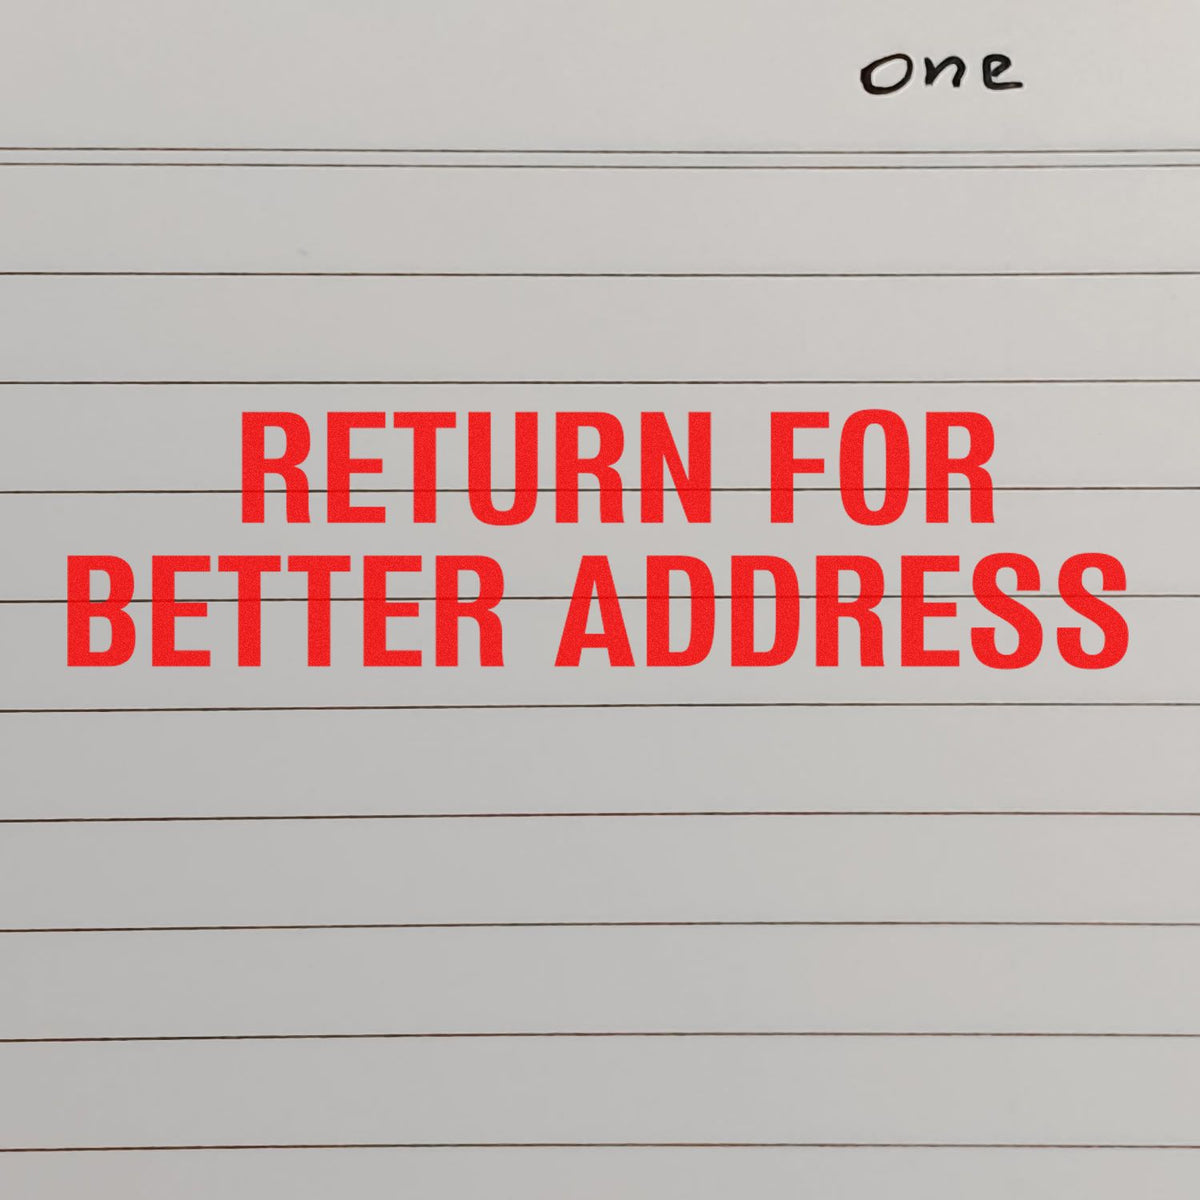 Return for Better Address Rubber Stamp In Use Photo